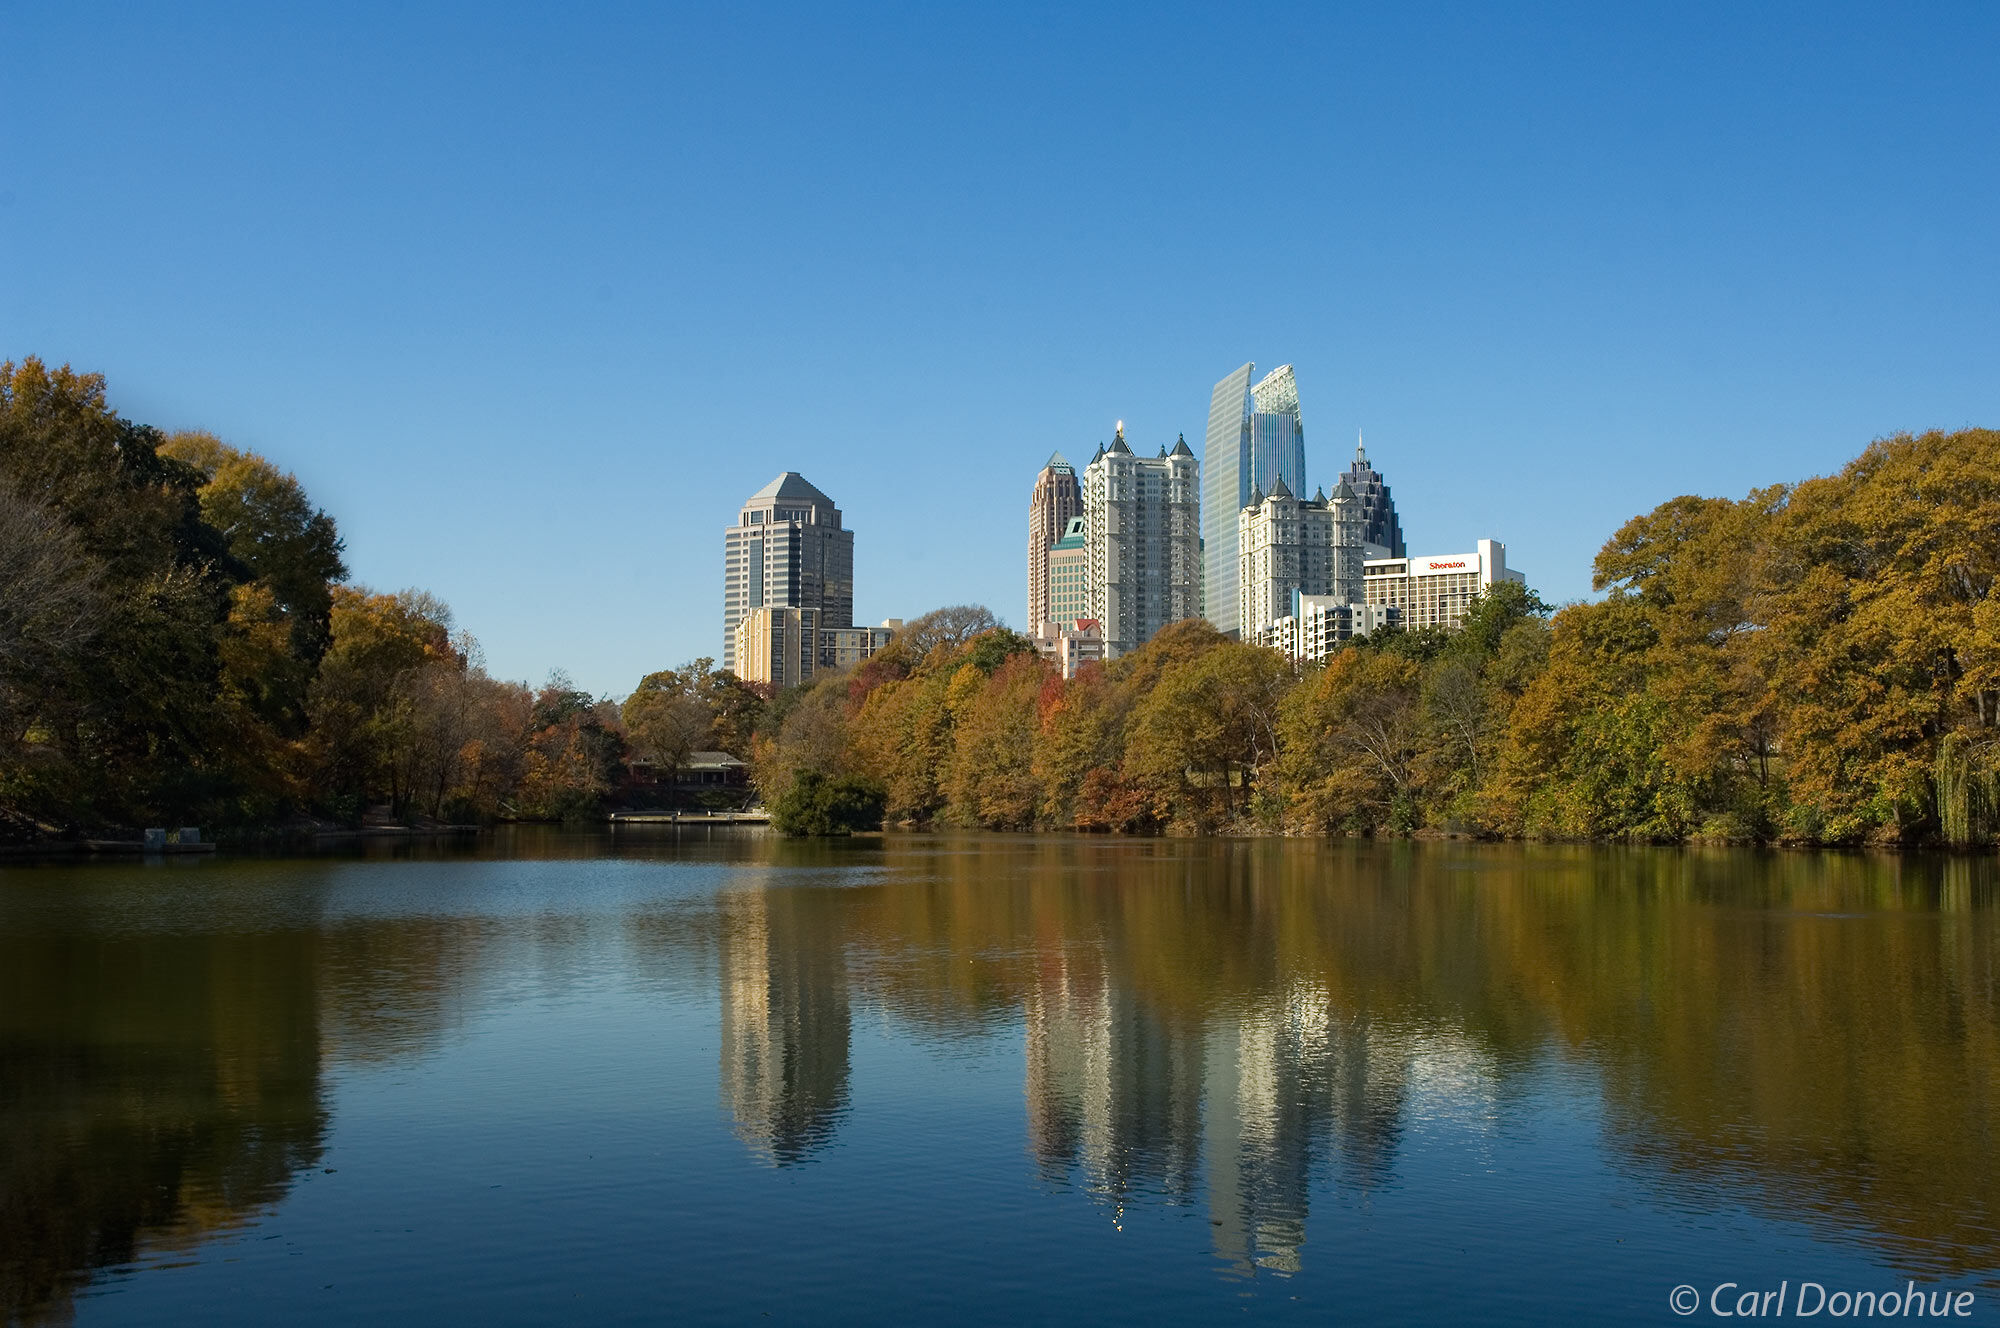 Midtown Atlanta skyline, from Piedmont Park. The park and pond is a popular destination for tourists and resident sto relax and...